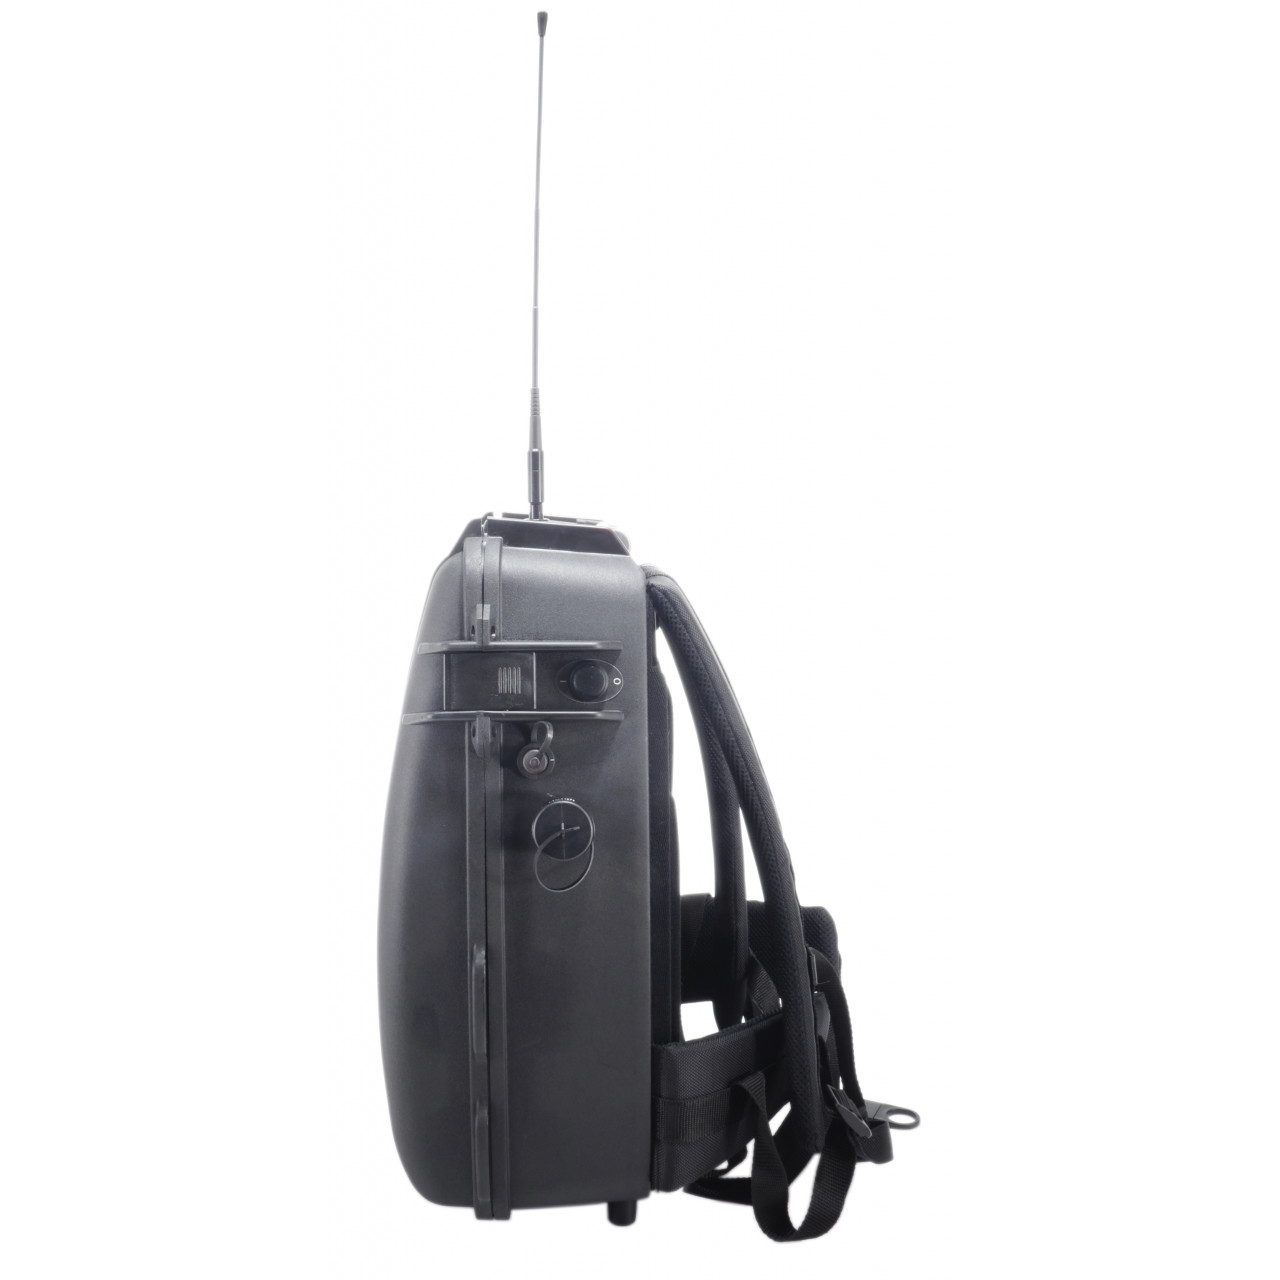 IF-BACKPACK-R5100 Repeaters - ICOM